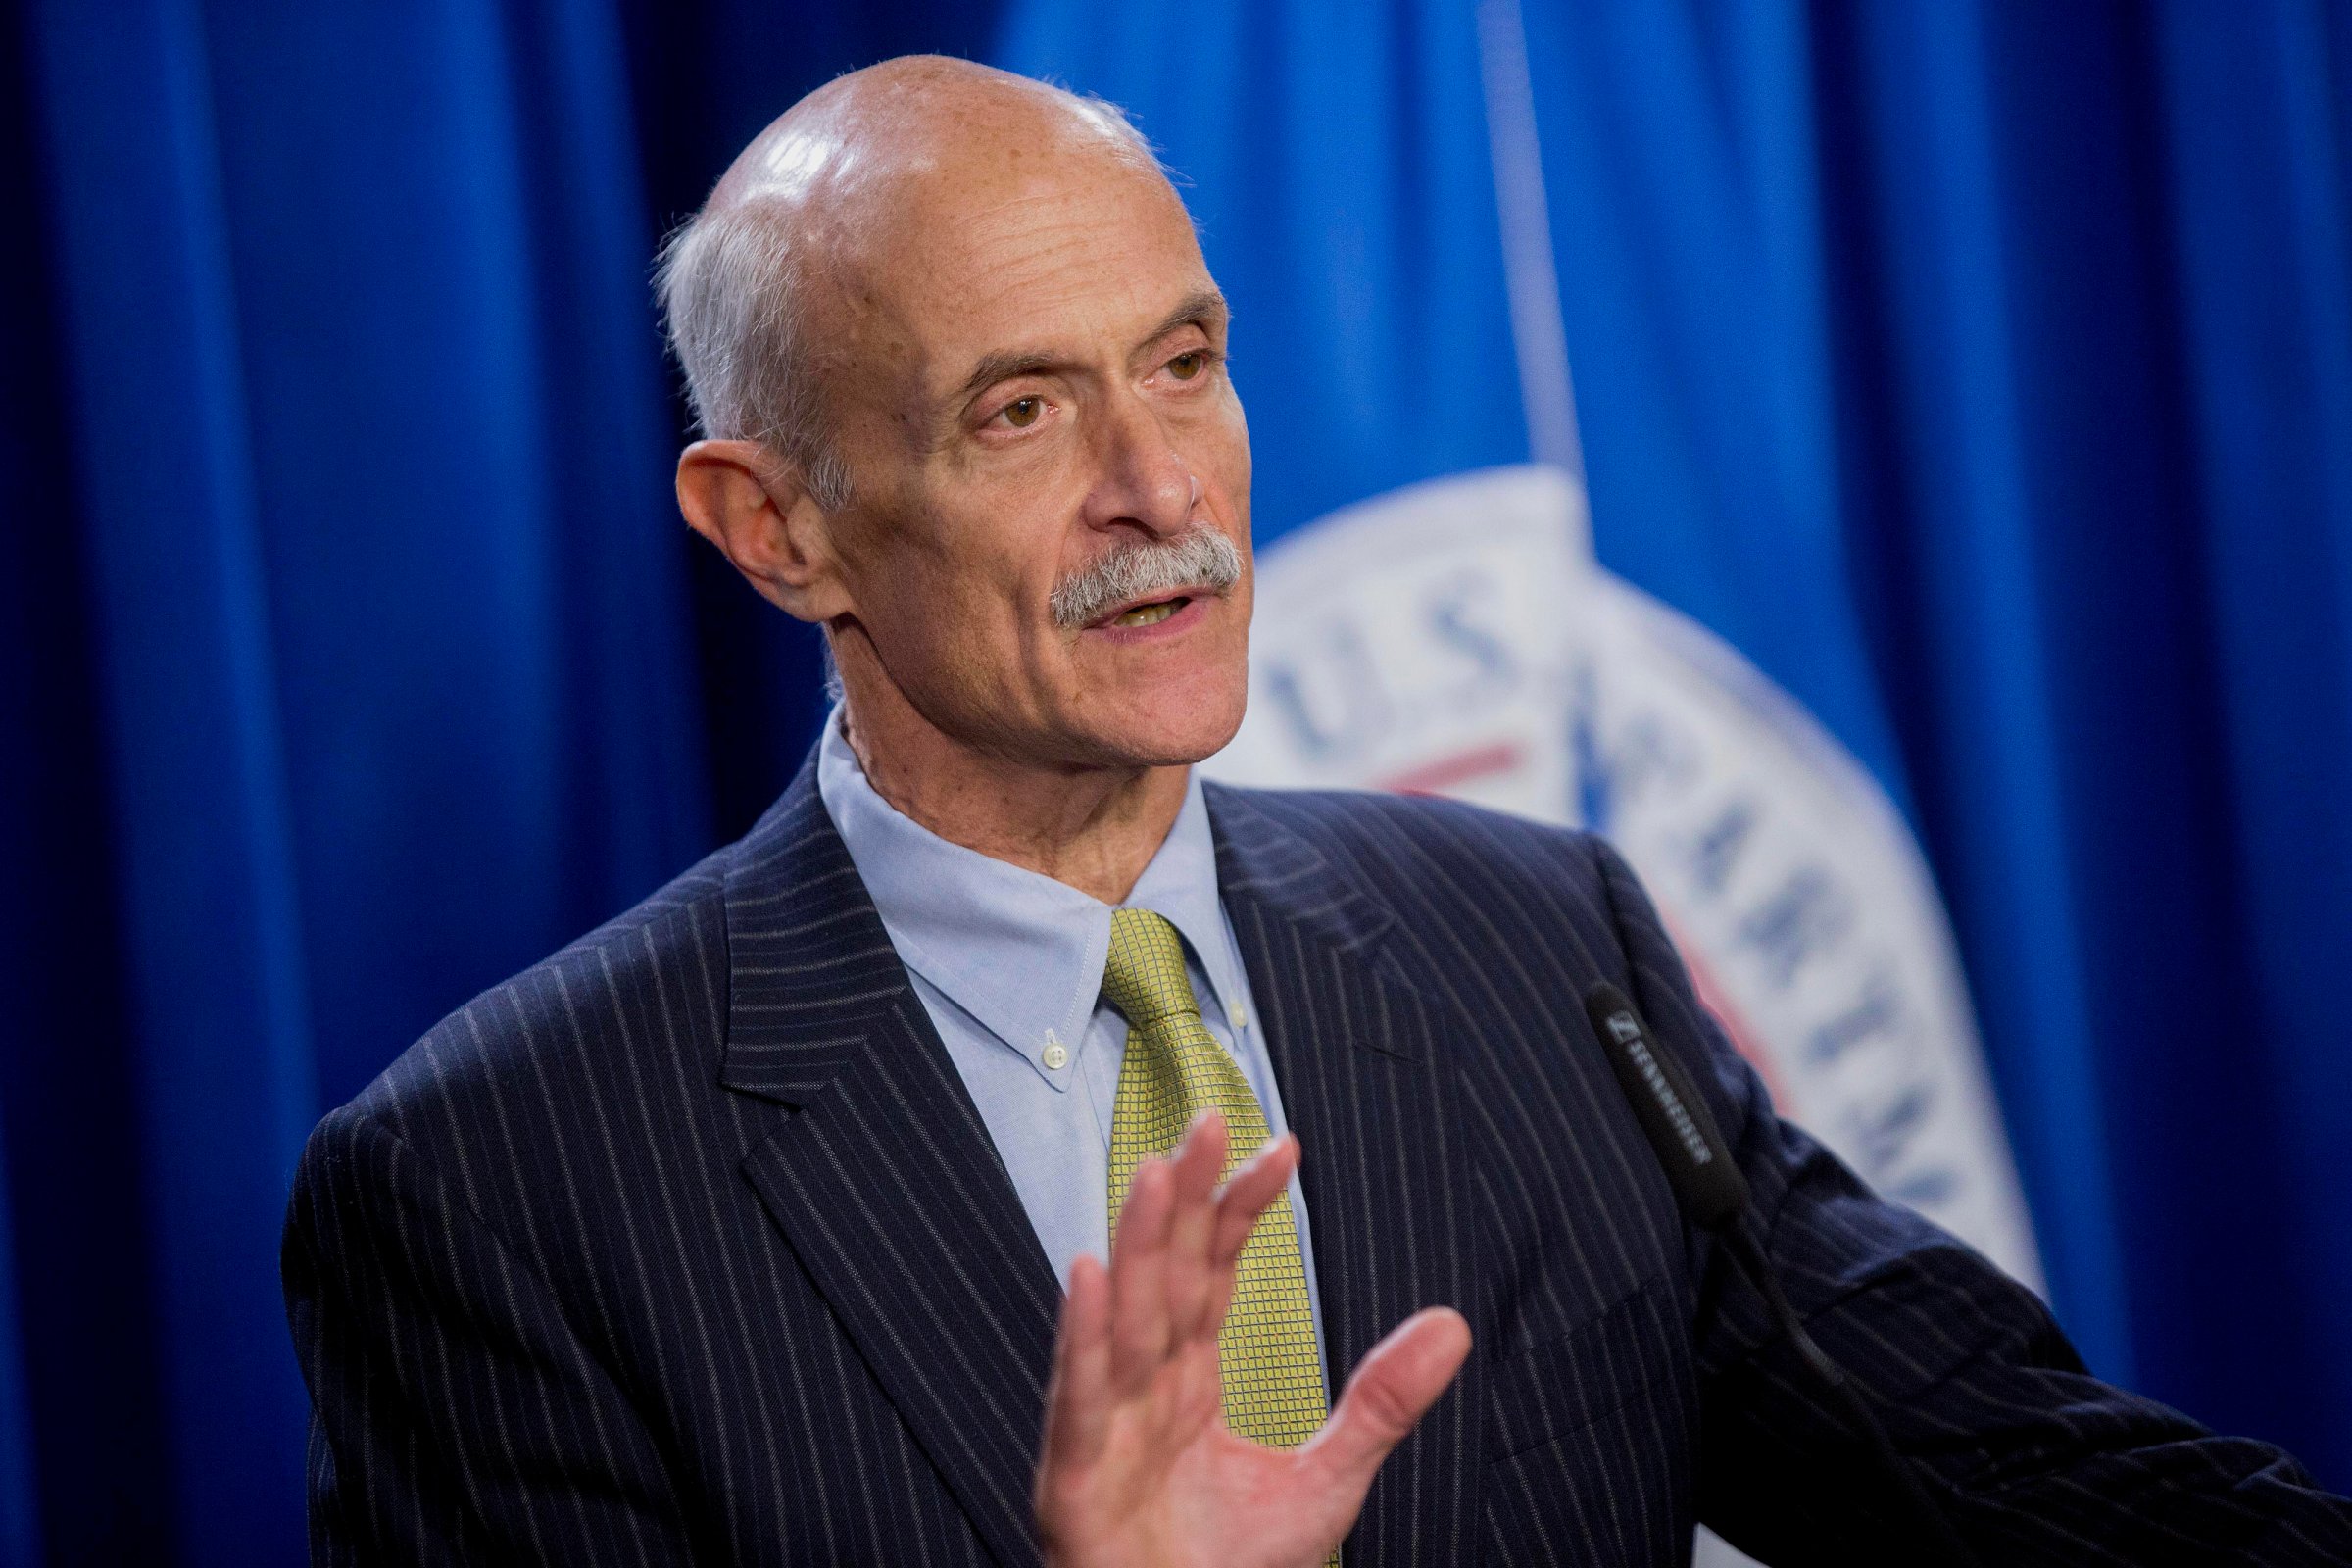 Michael Chertoff, former U.S. secretary of Homeland Security (DHS), speaks during a news conference with Jeh Johnson, U.S. secretary of Homeland Security (DHS), and former secretaries of Homeland Security Tom Ridge, not pictured, at the U.S. Immigration and Customs Enforcement (ICE) in Washington, D.C., U.S., on Feb. 25, 2015.